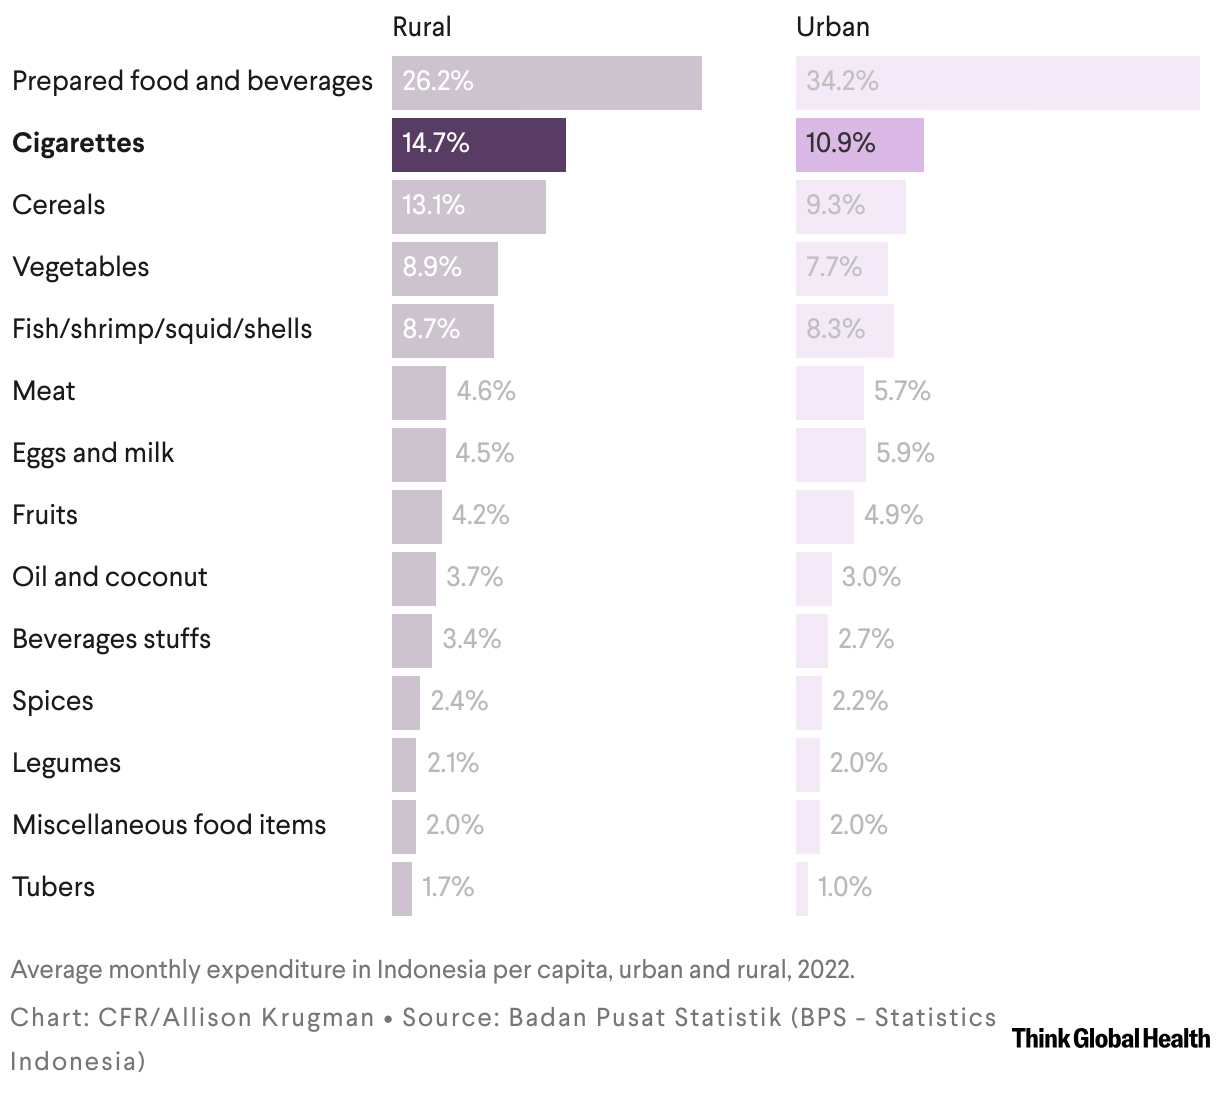 Two bar charts (rural and urban) showing spending on cigarettes compared to other essential food items. Spending is 14.7% on cigarettes in rural communities versus 10.9% in urban.